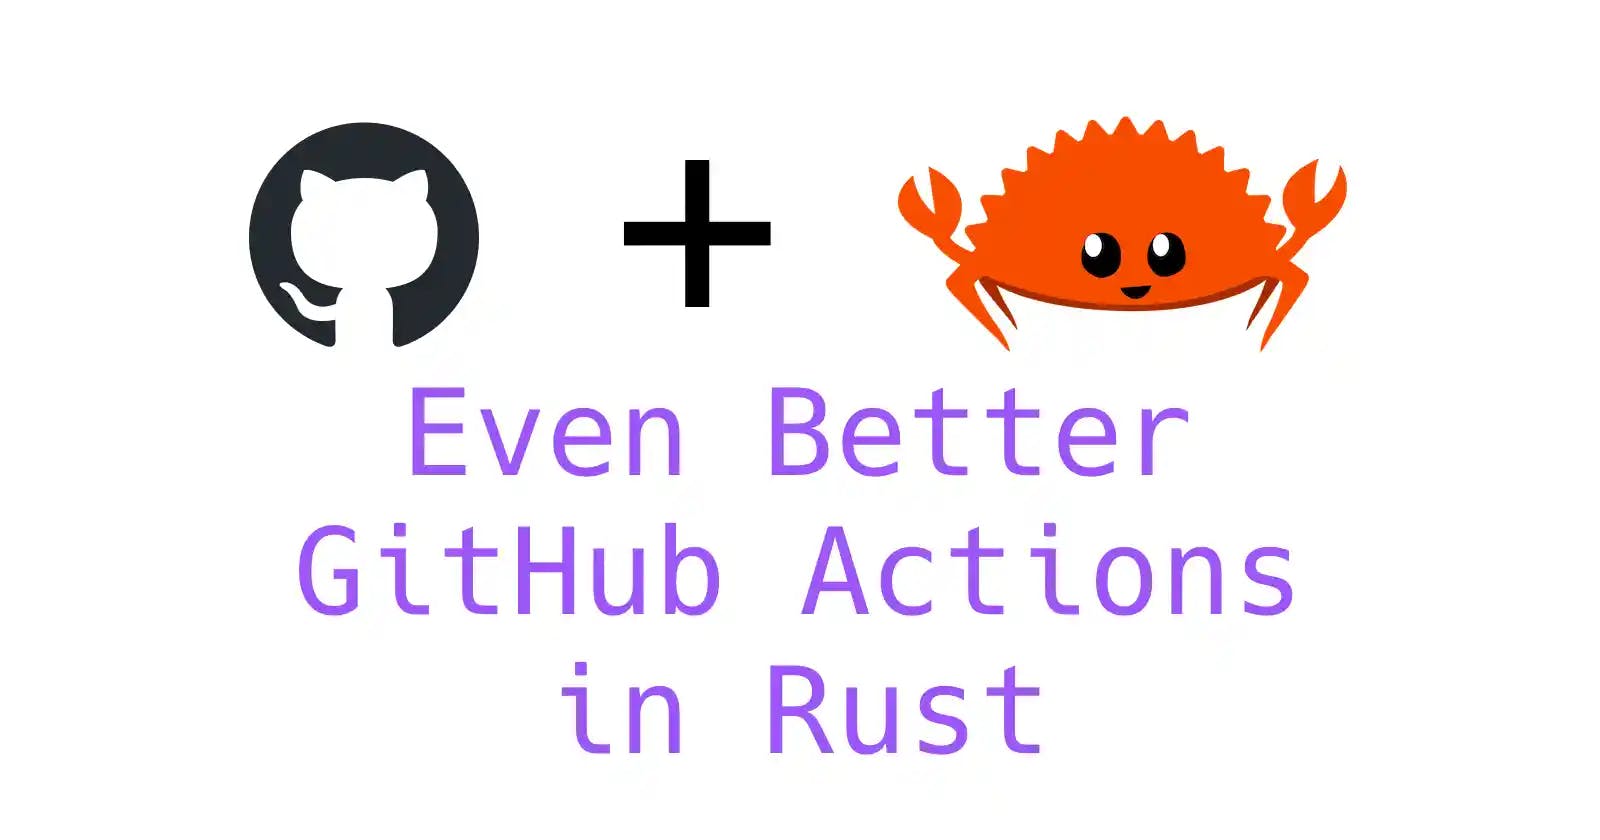 Even Better GitHub Actions in Rust